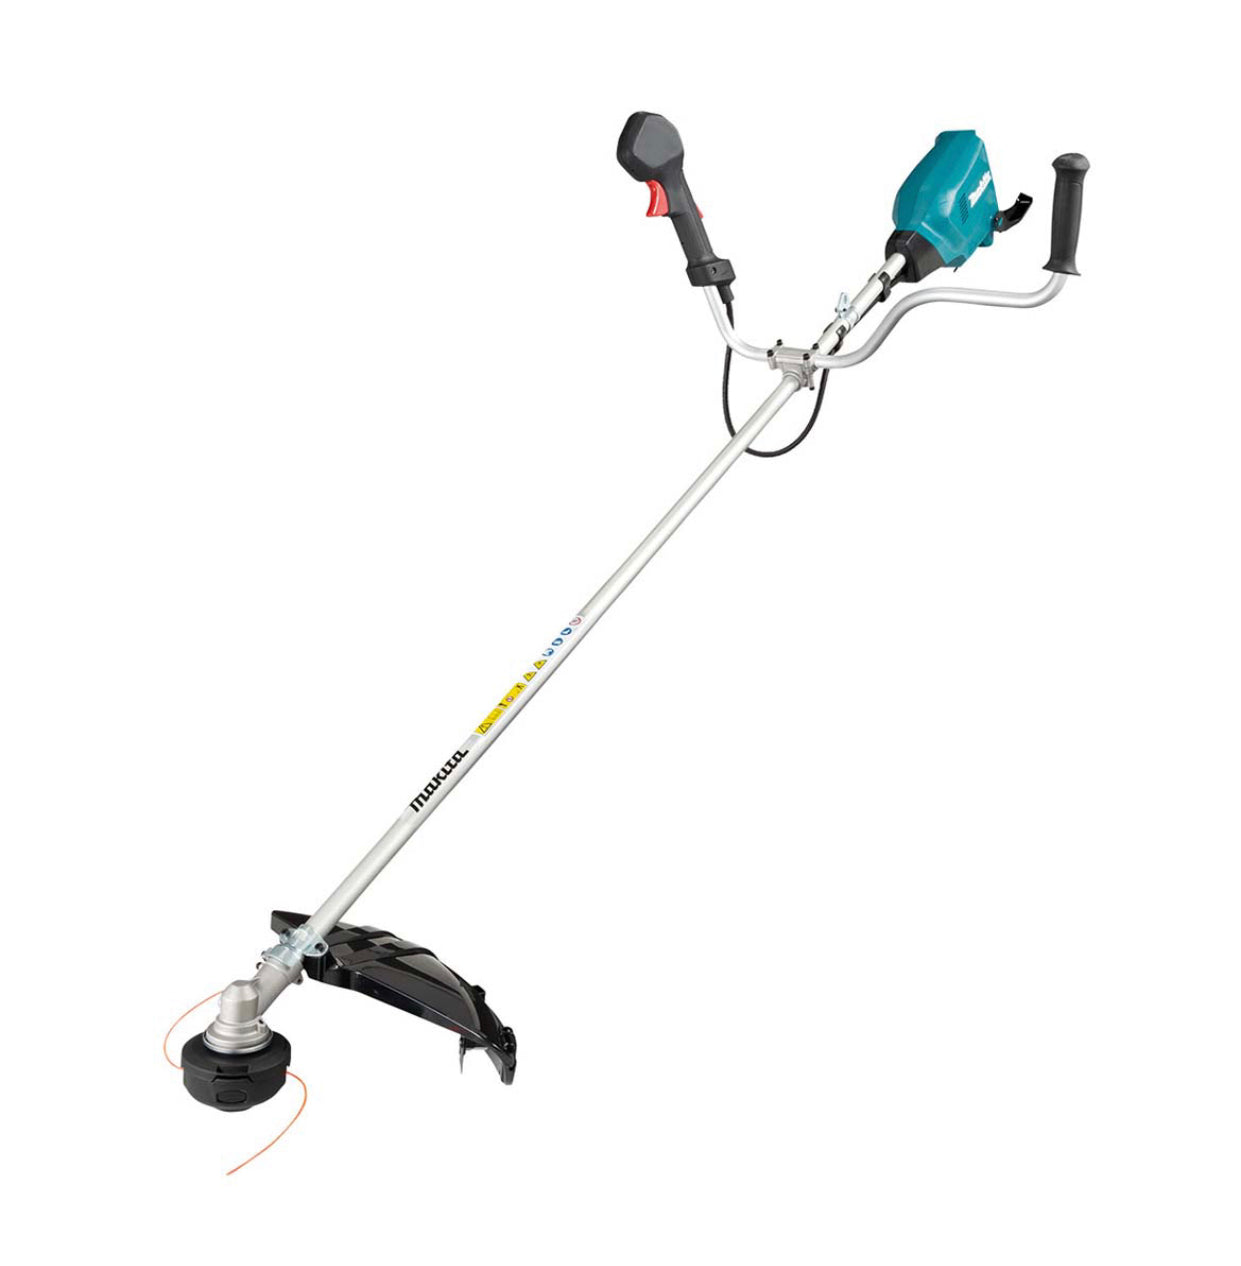 18Vx2 Brushless Loop Handle Line Trimmer Bare (Tool Only) DUR369LZ by Makita